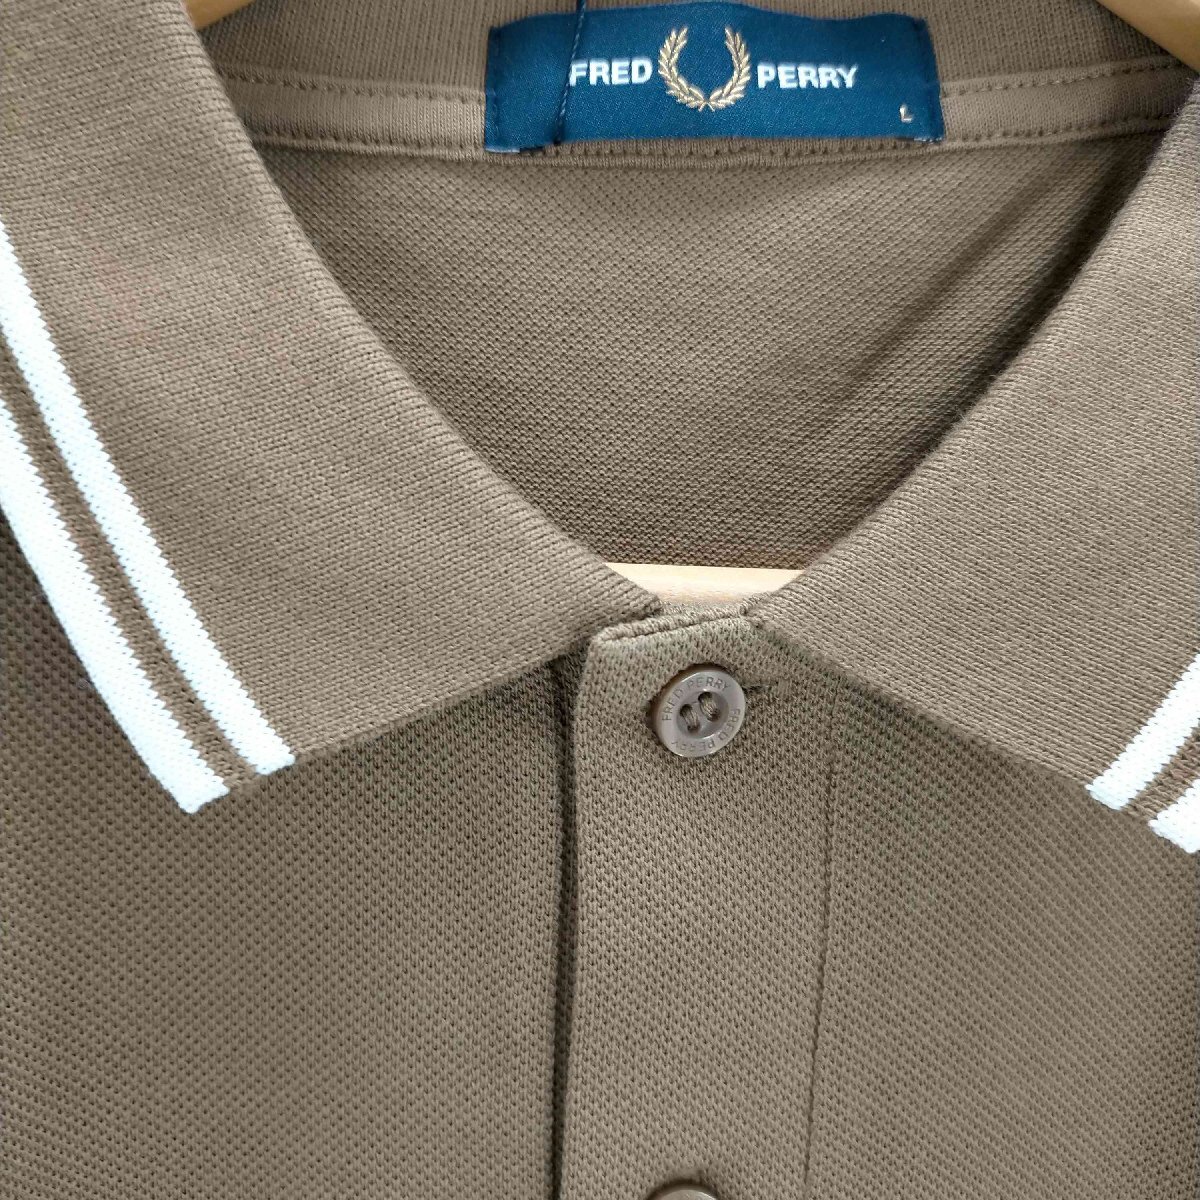 FRED PERRY(フレッドペリー) The Twin Tipped Fred Perry Shirt 中古 古着 0203_画像3